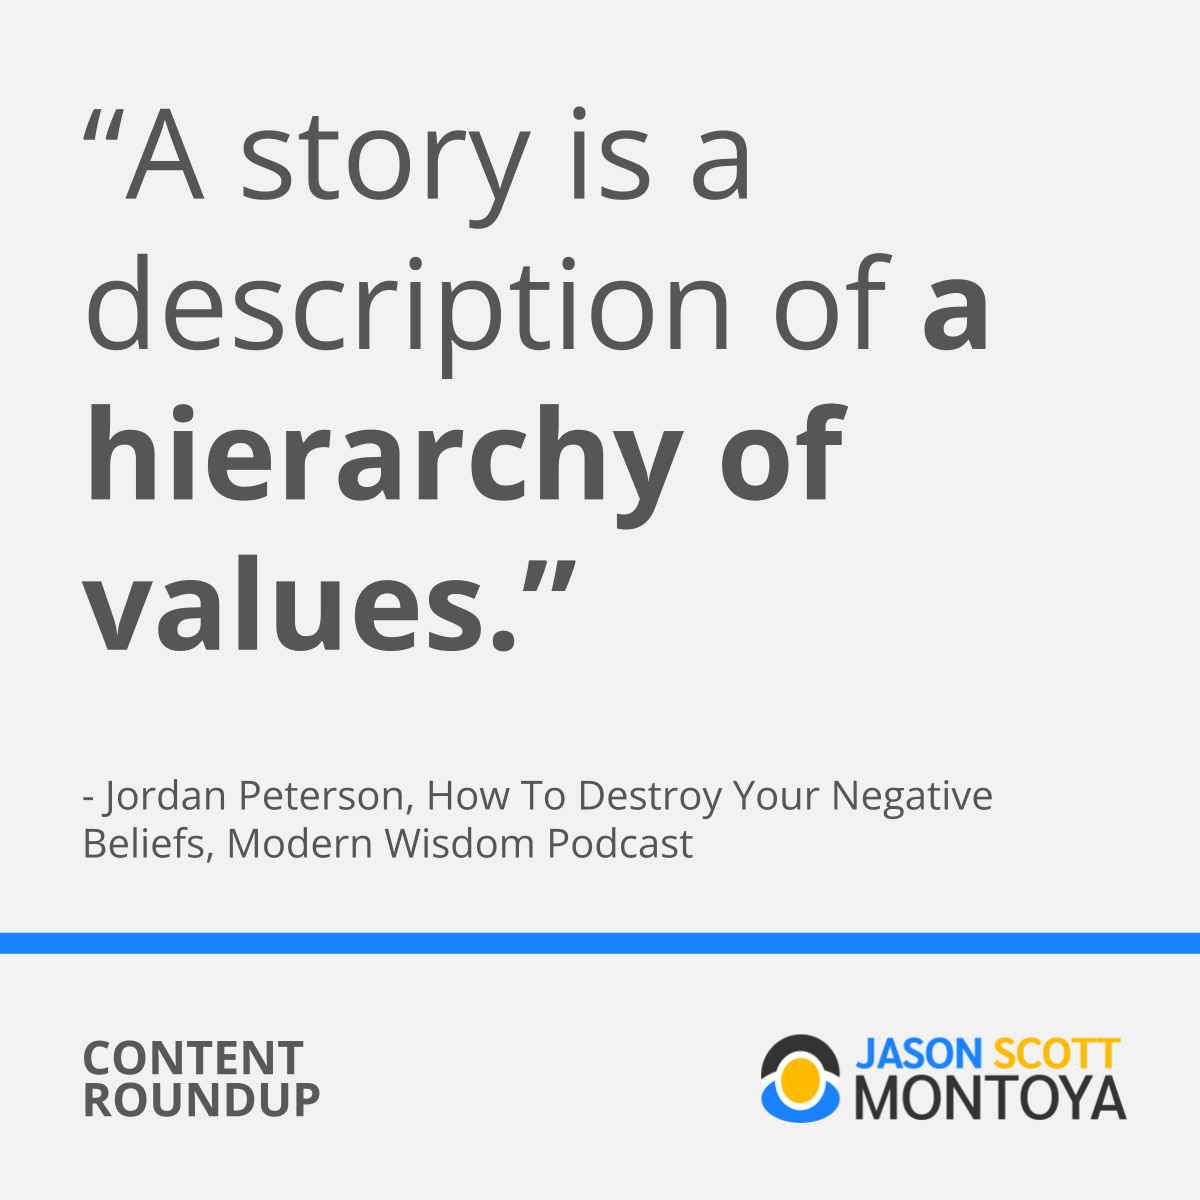  “A story is a description of a hierarchy of values.”   - Jordan Peterson, How To Destroy Your Negative Beliefs, Modern Wisdom Podcast